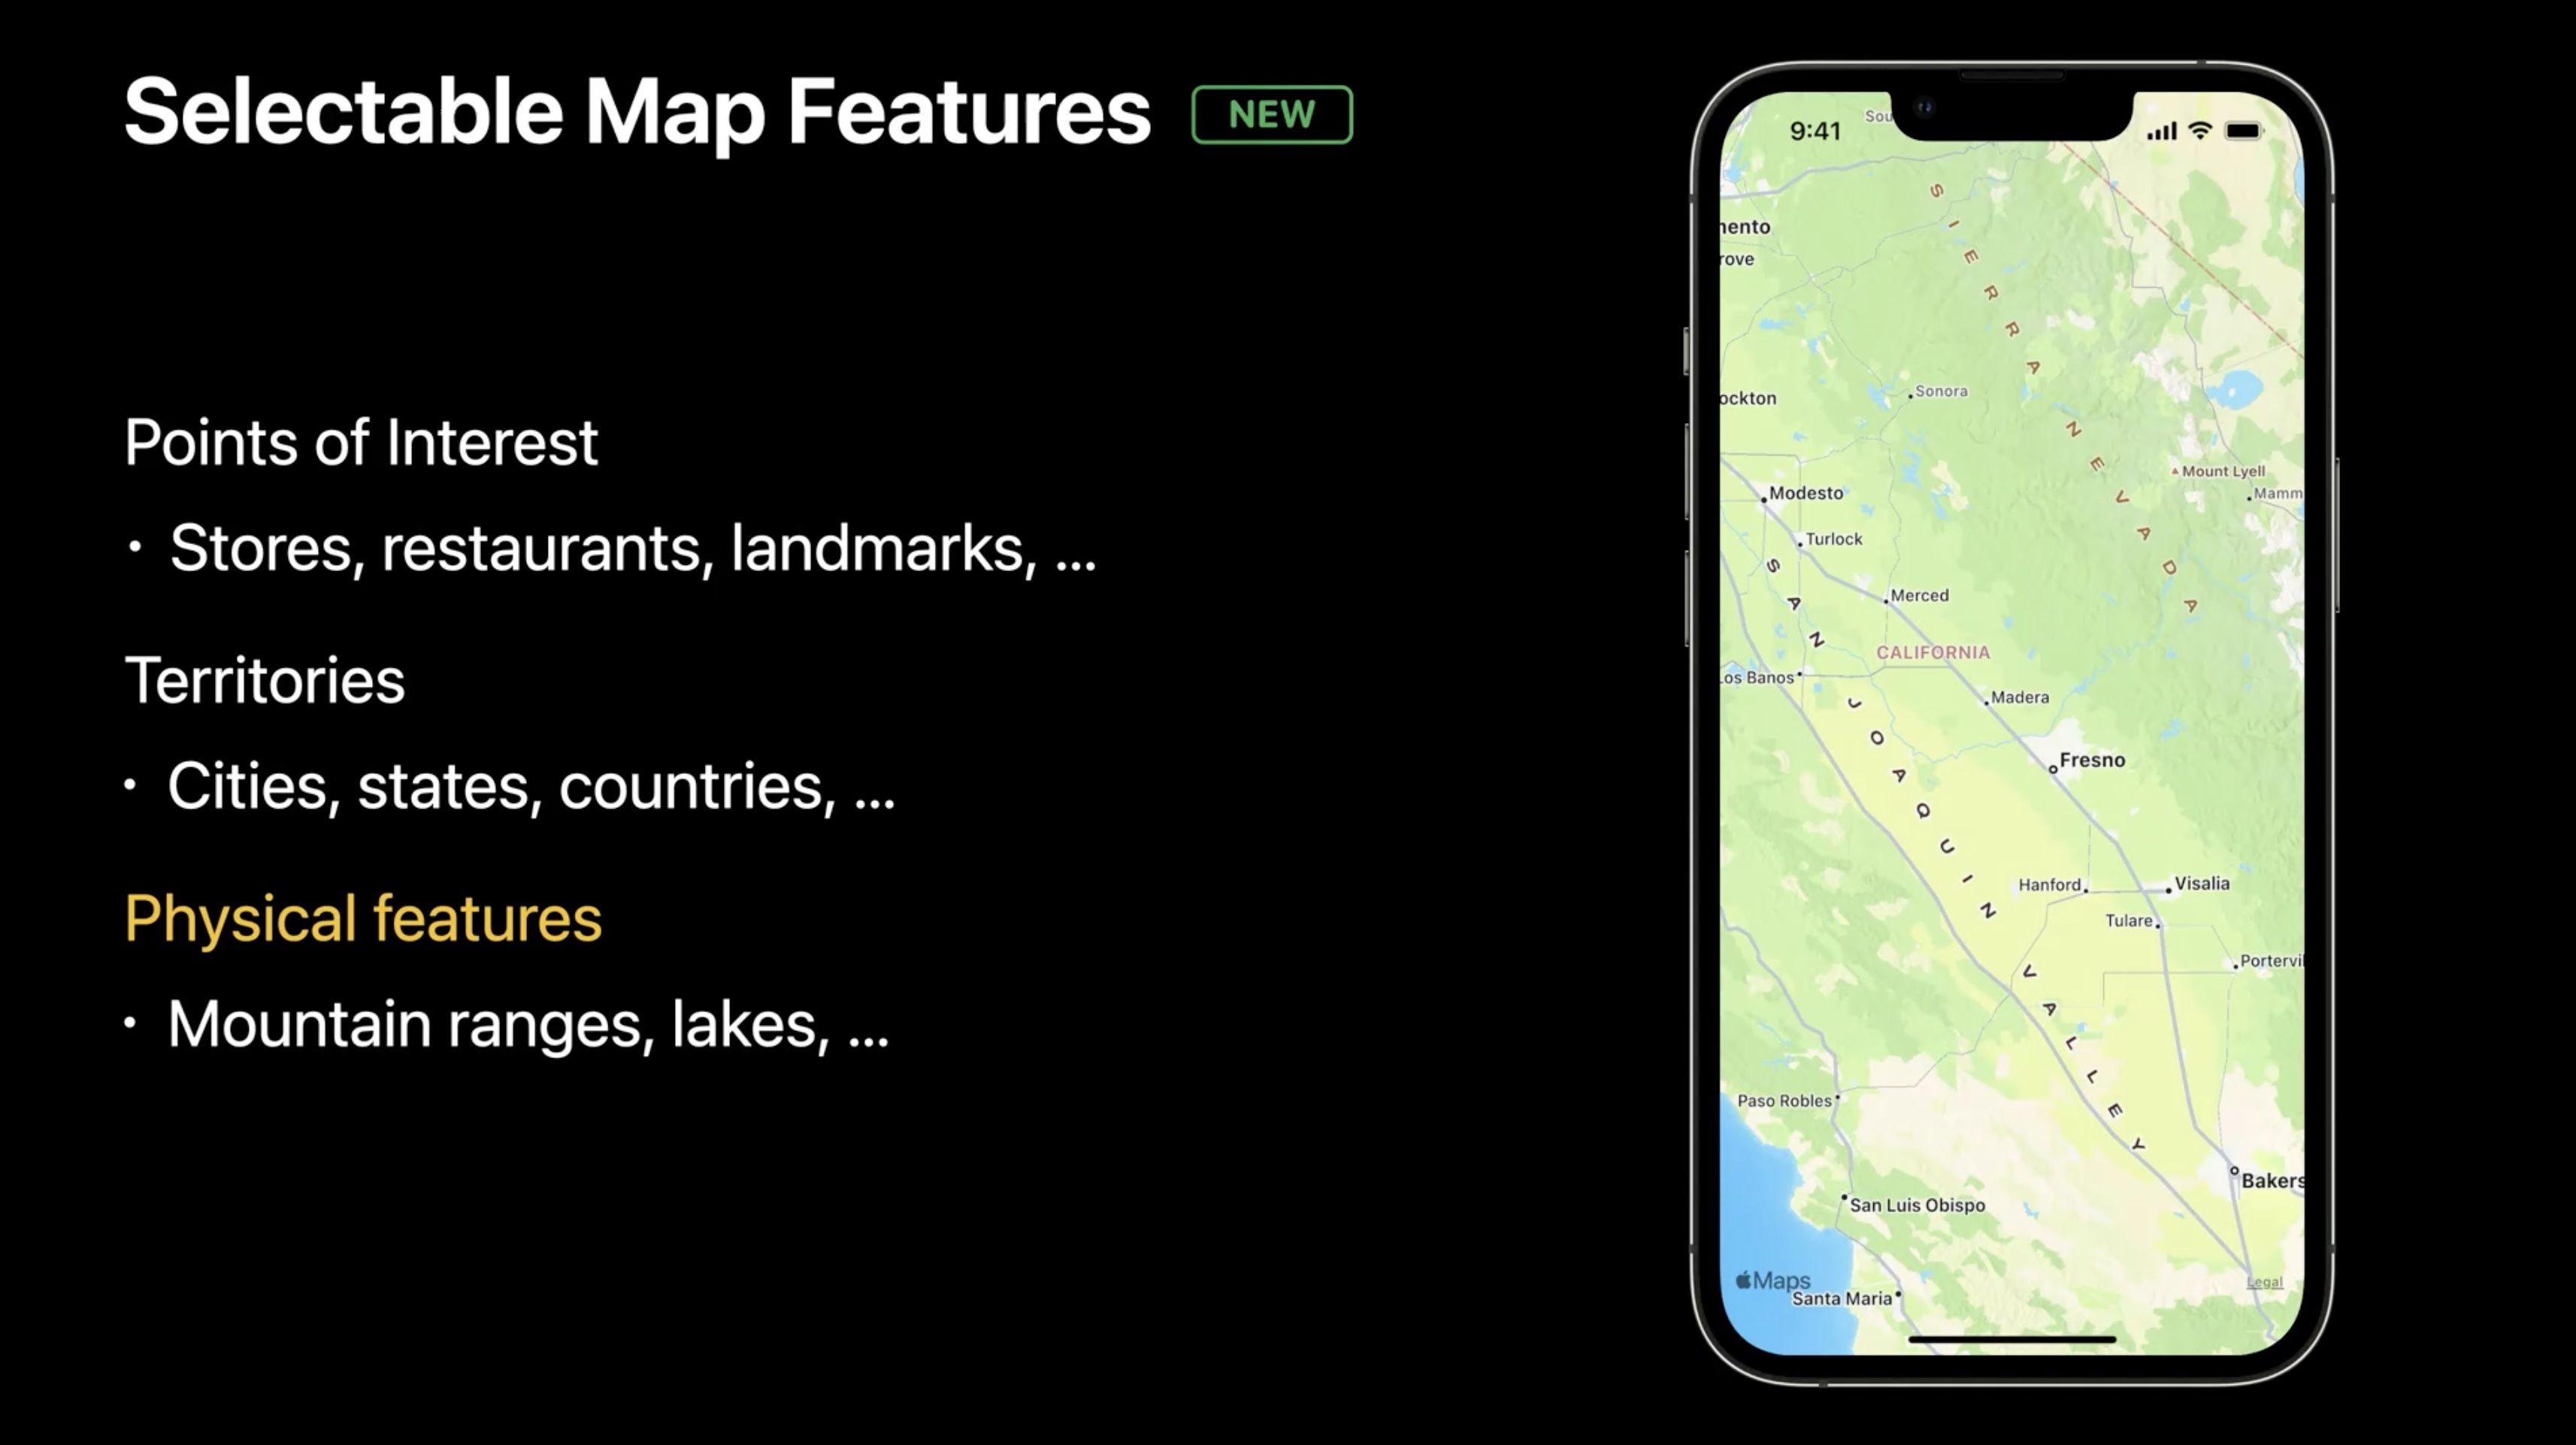 Selectable Map Features